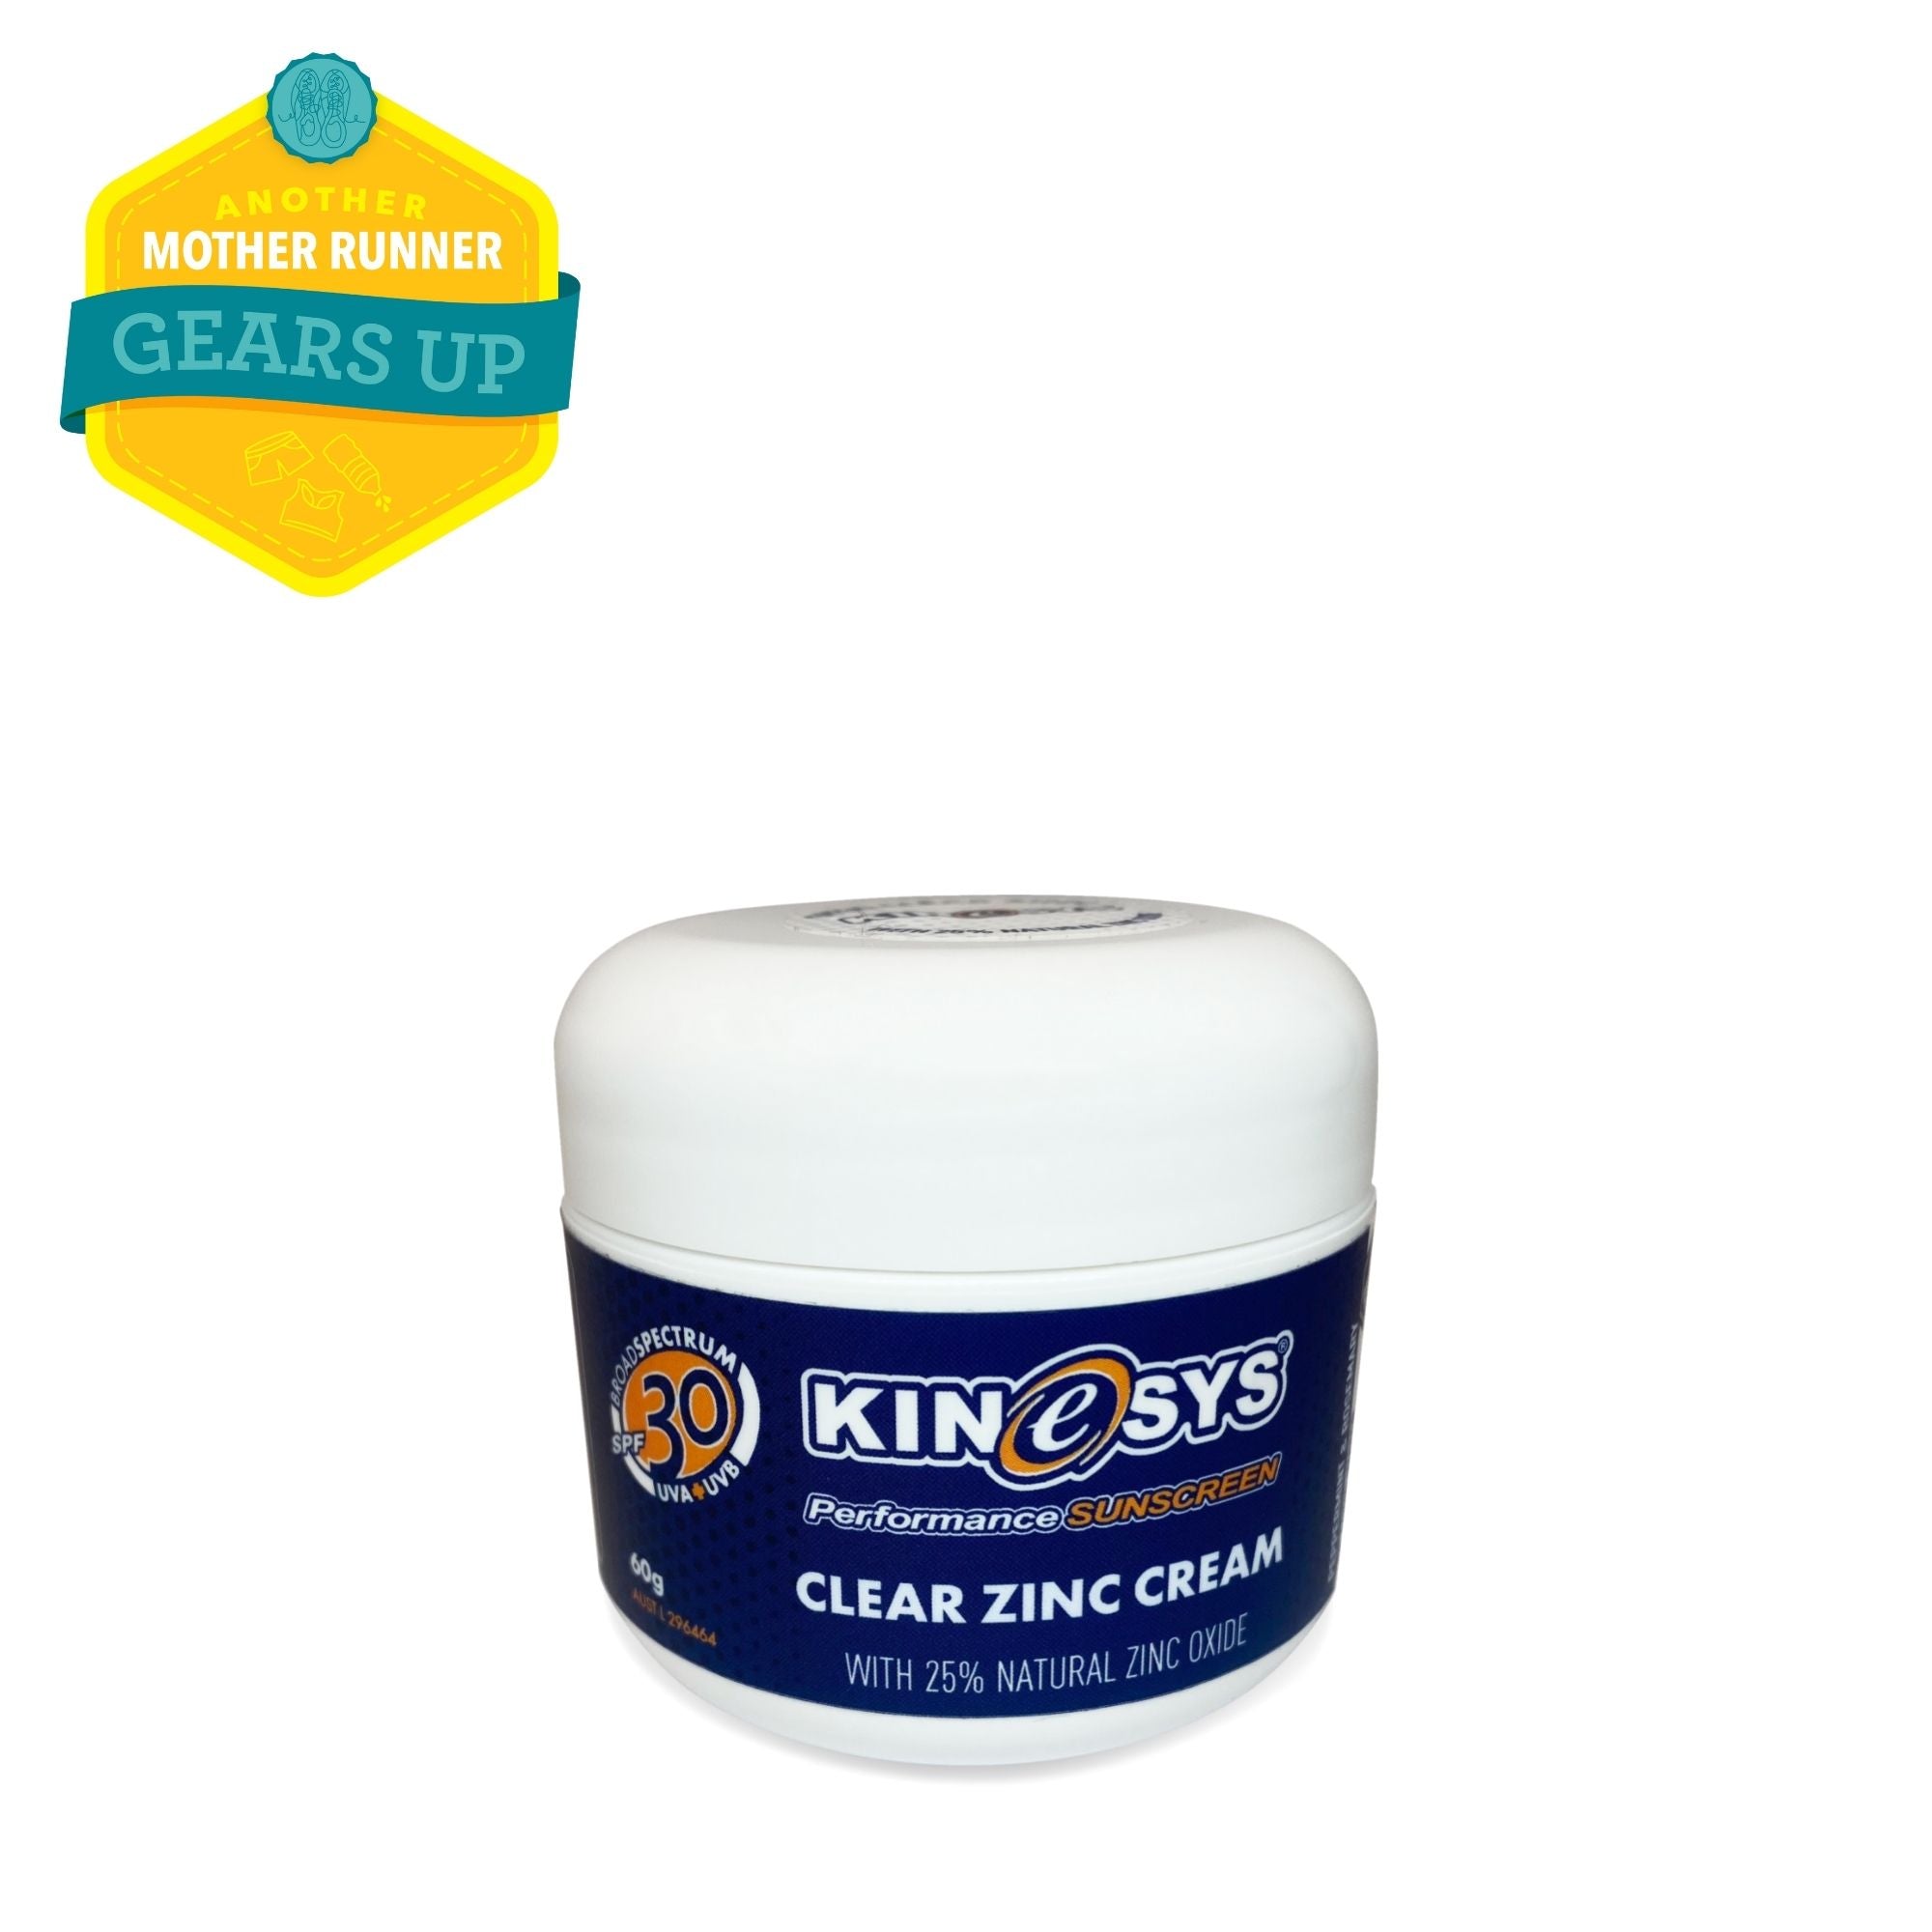 KINeSYS SPF 30 Natural Clear Zinc